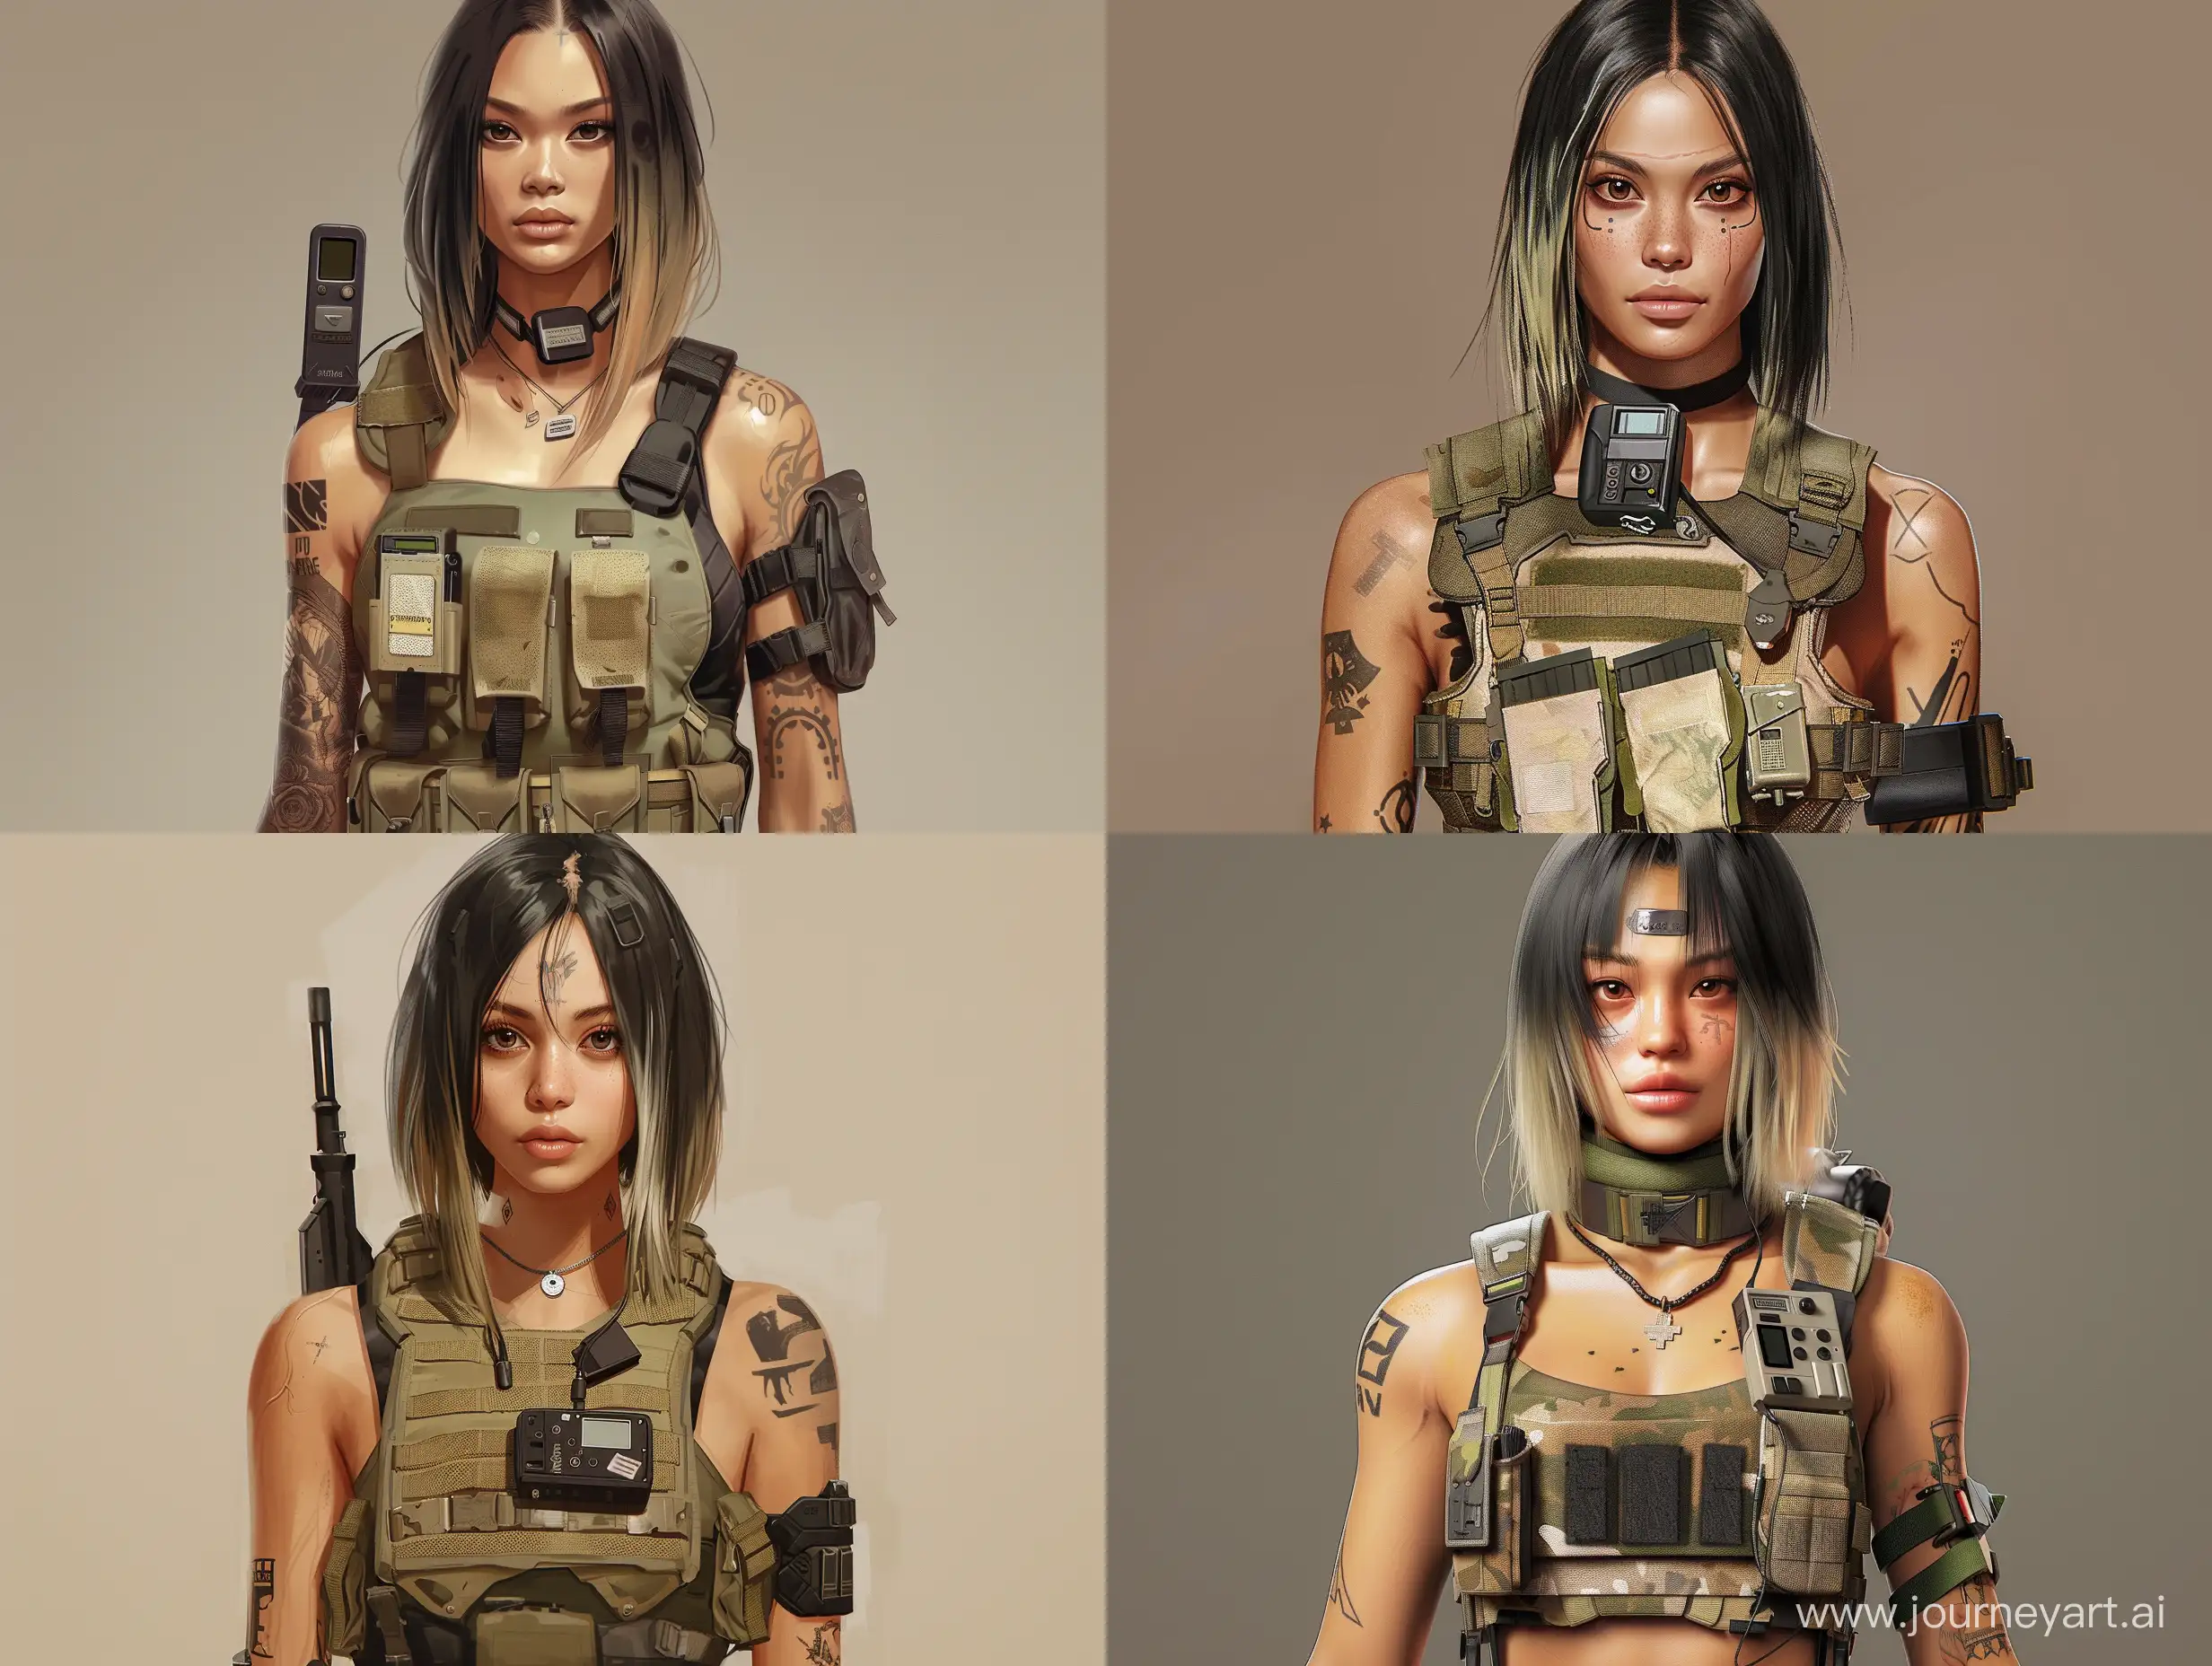 Made in a good-looking art style semi-realism or anime. She was in a customized military uniform with random accessories, there was a walkie-talkie on her armor vest, a dog tag on her neck, and the rest of the equipment on her toned but still pale body. A neat black but blonde at the roots of straight medium hair accentuated the jawline. Her appearance was like a mixed Slavic woman. Brown almost lantern-piercing eyes and a defiant attitude. Tattoos along arms.